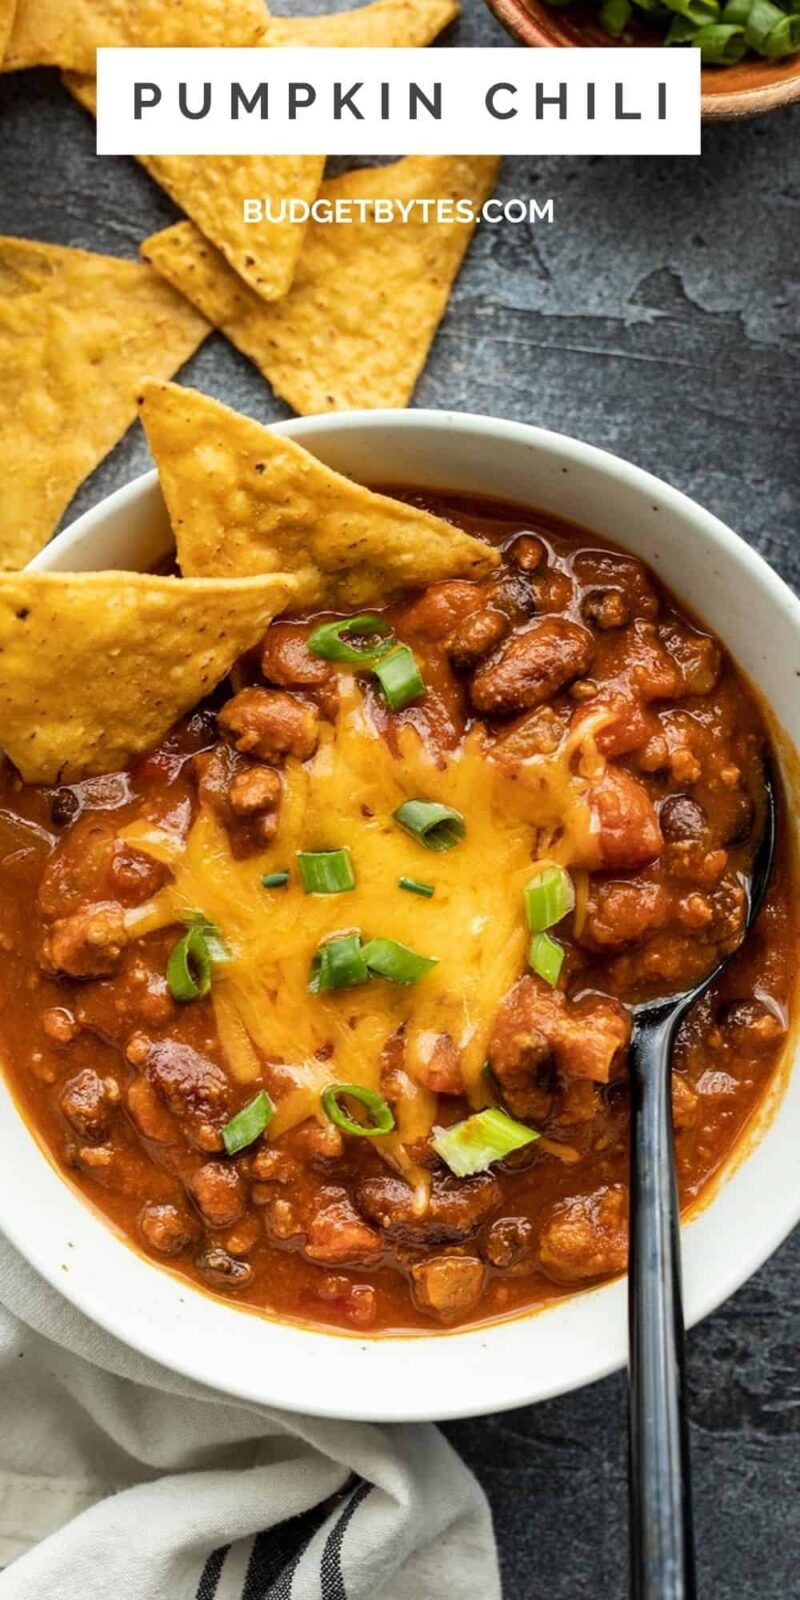 Overhead view of a bowl of pumpkin chili, title text at the top